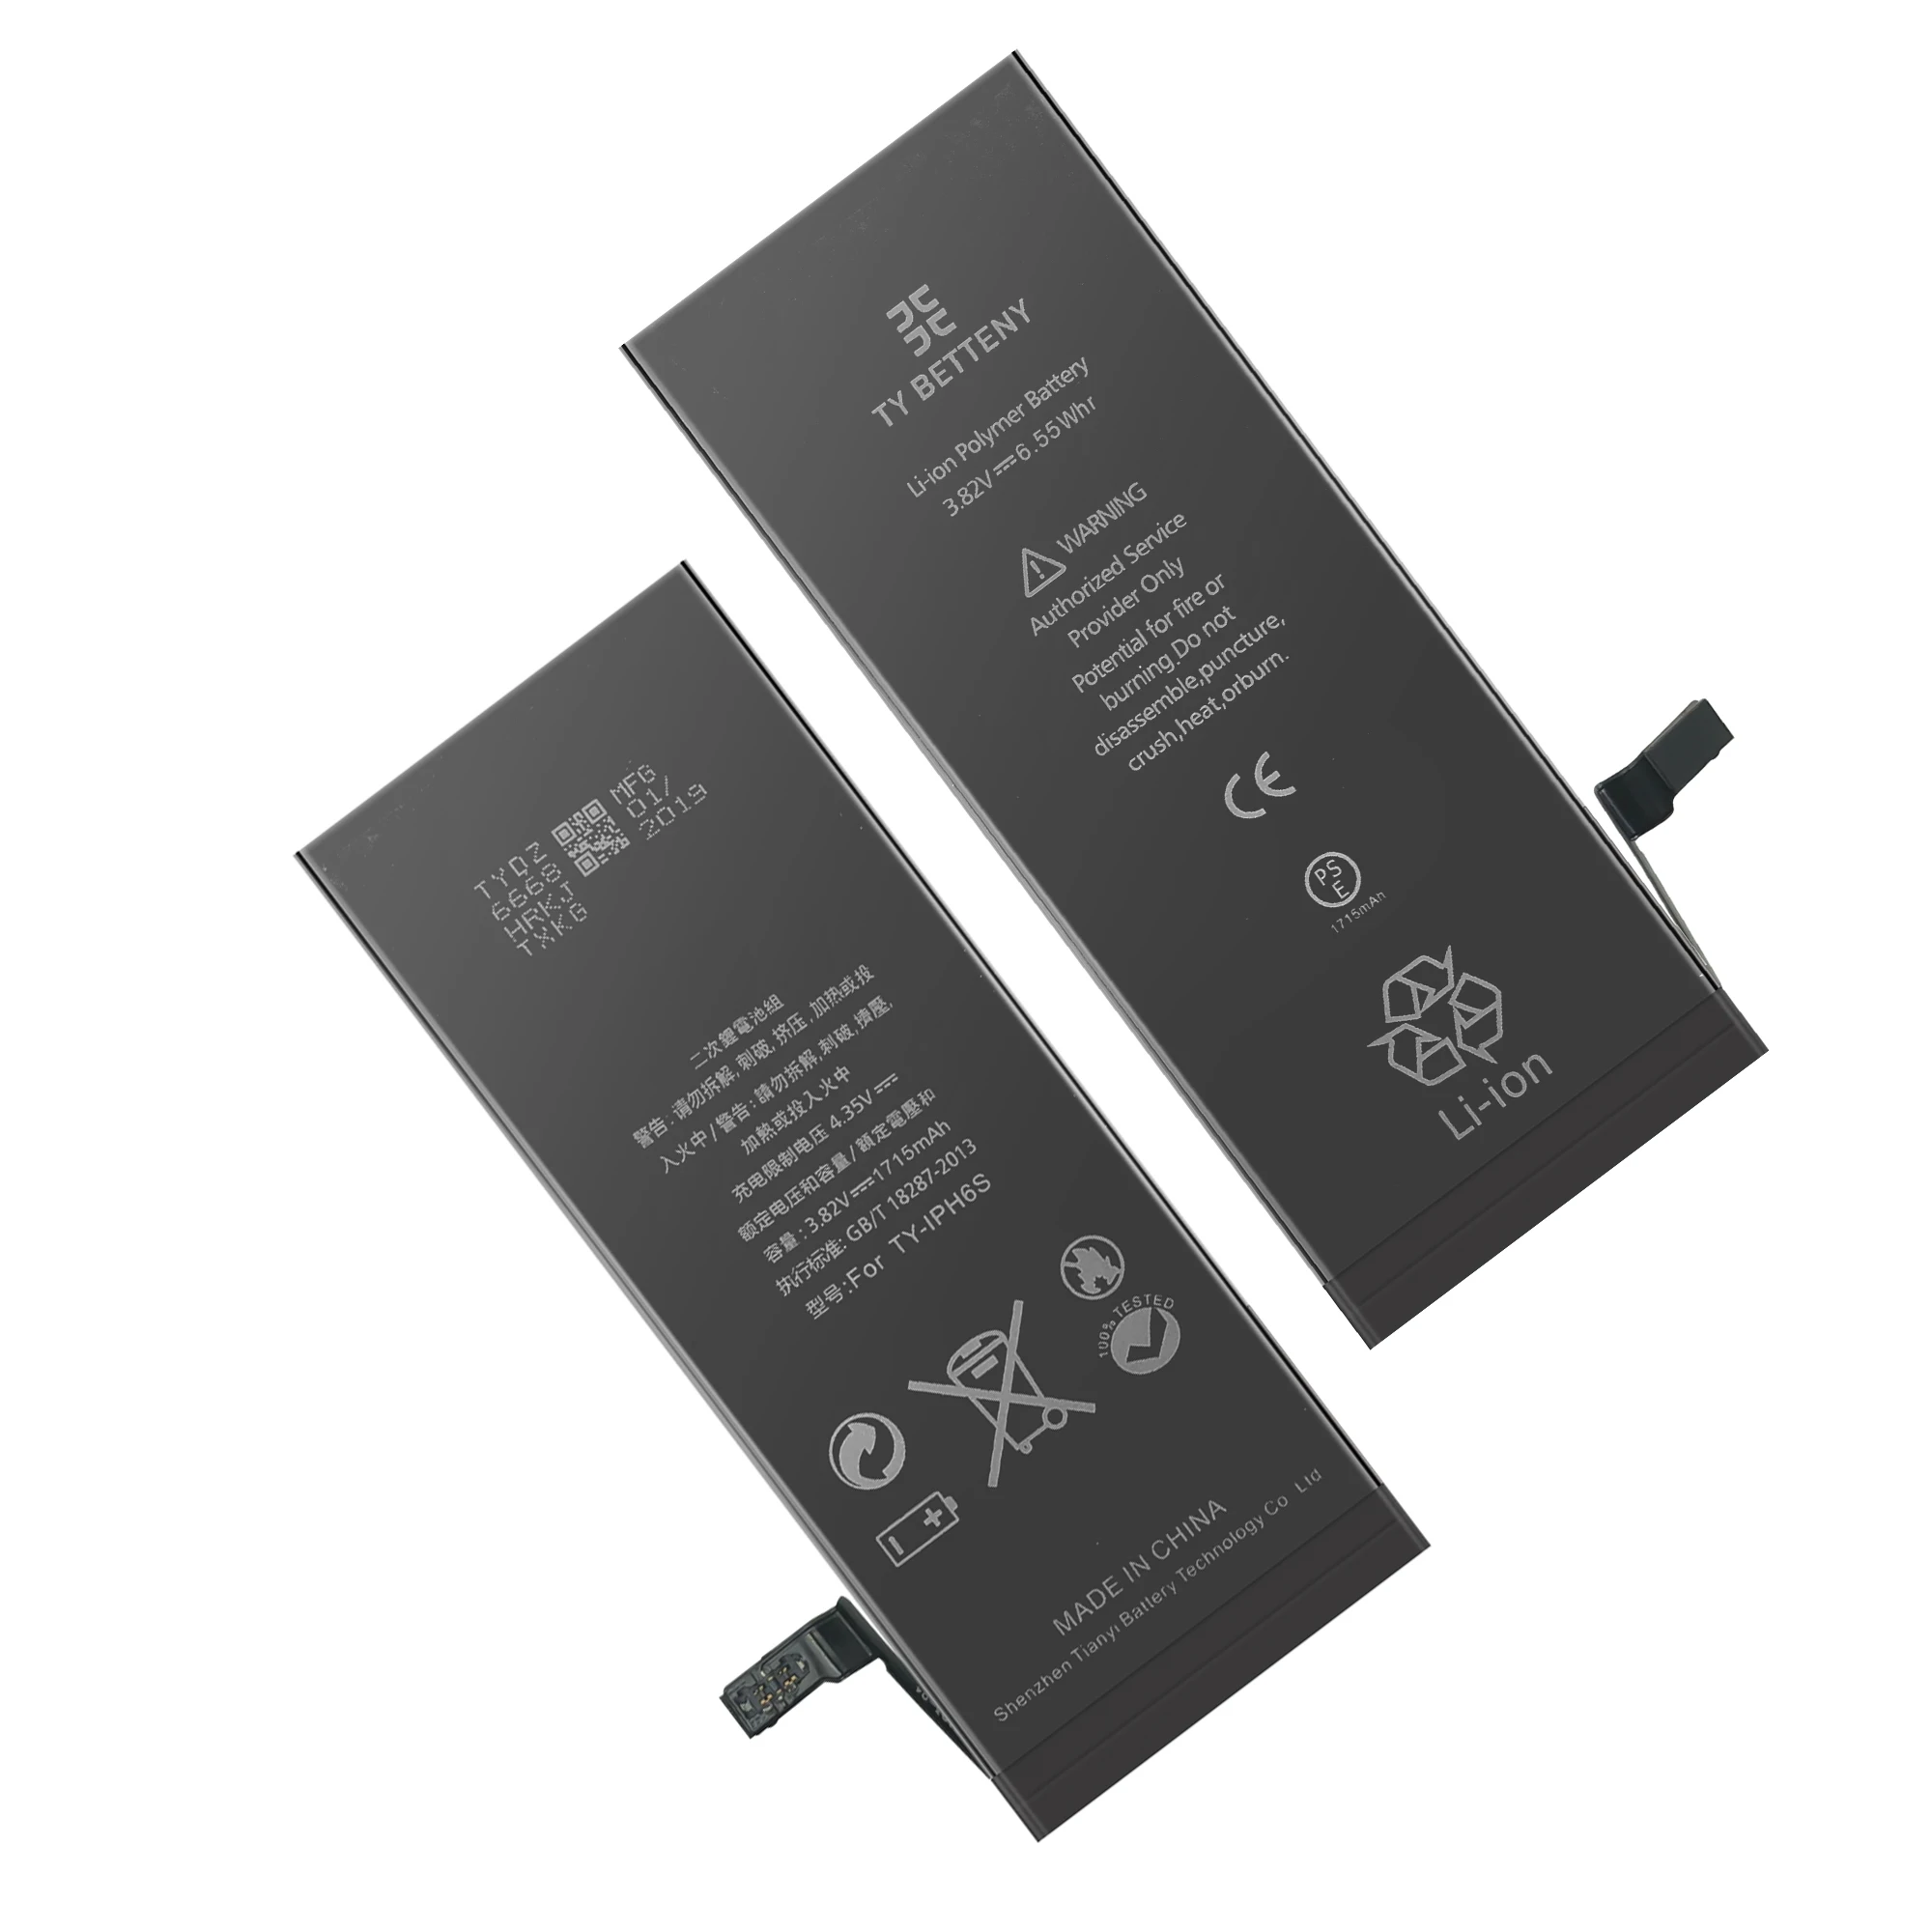 12 Years Factory Direct Sale for iphone 5 5s se 6 6s 6p 6sp 7g 7p 8g 8p x mobile battery batteries